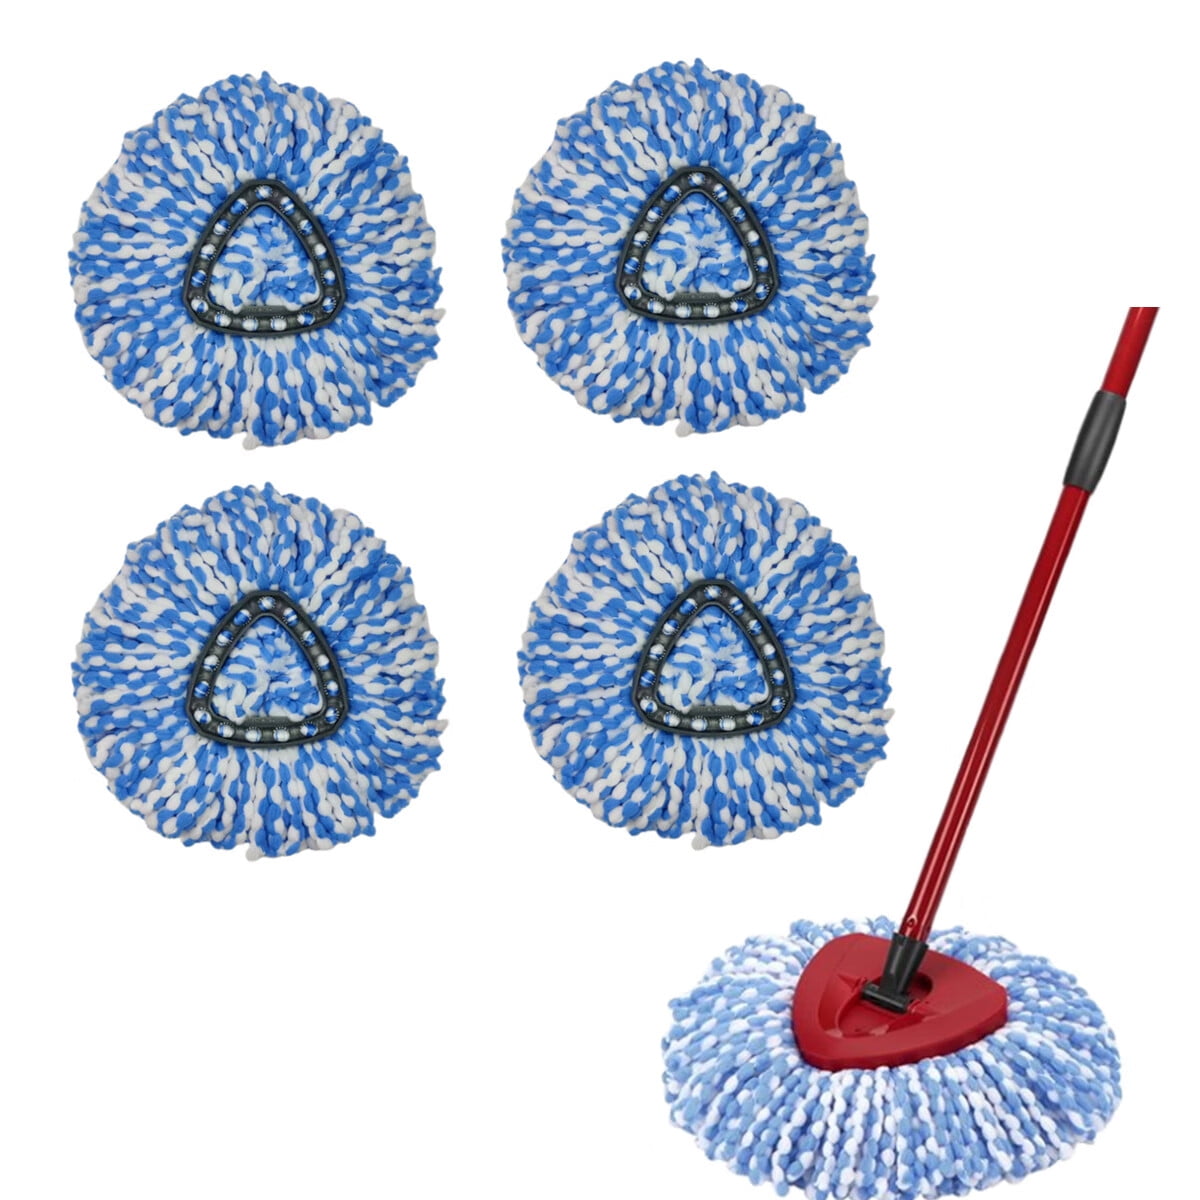 Spin Mop Refills for 2-Tank System Triangle Mop-Head Easy Rinse Cleaning Microfiber Mop Head Replacement 